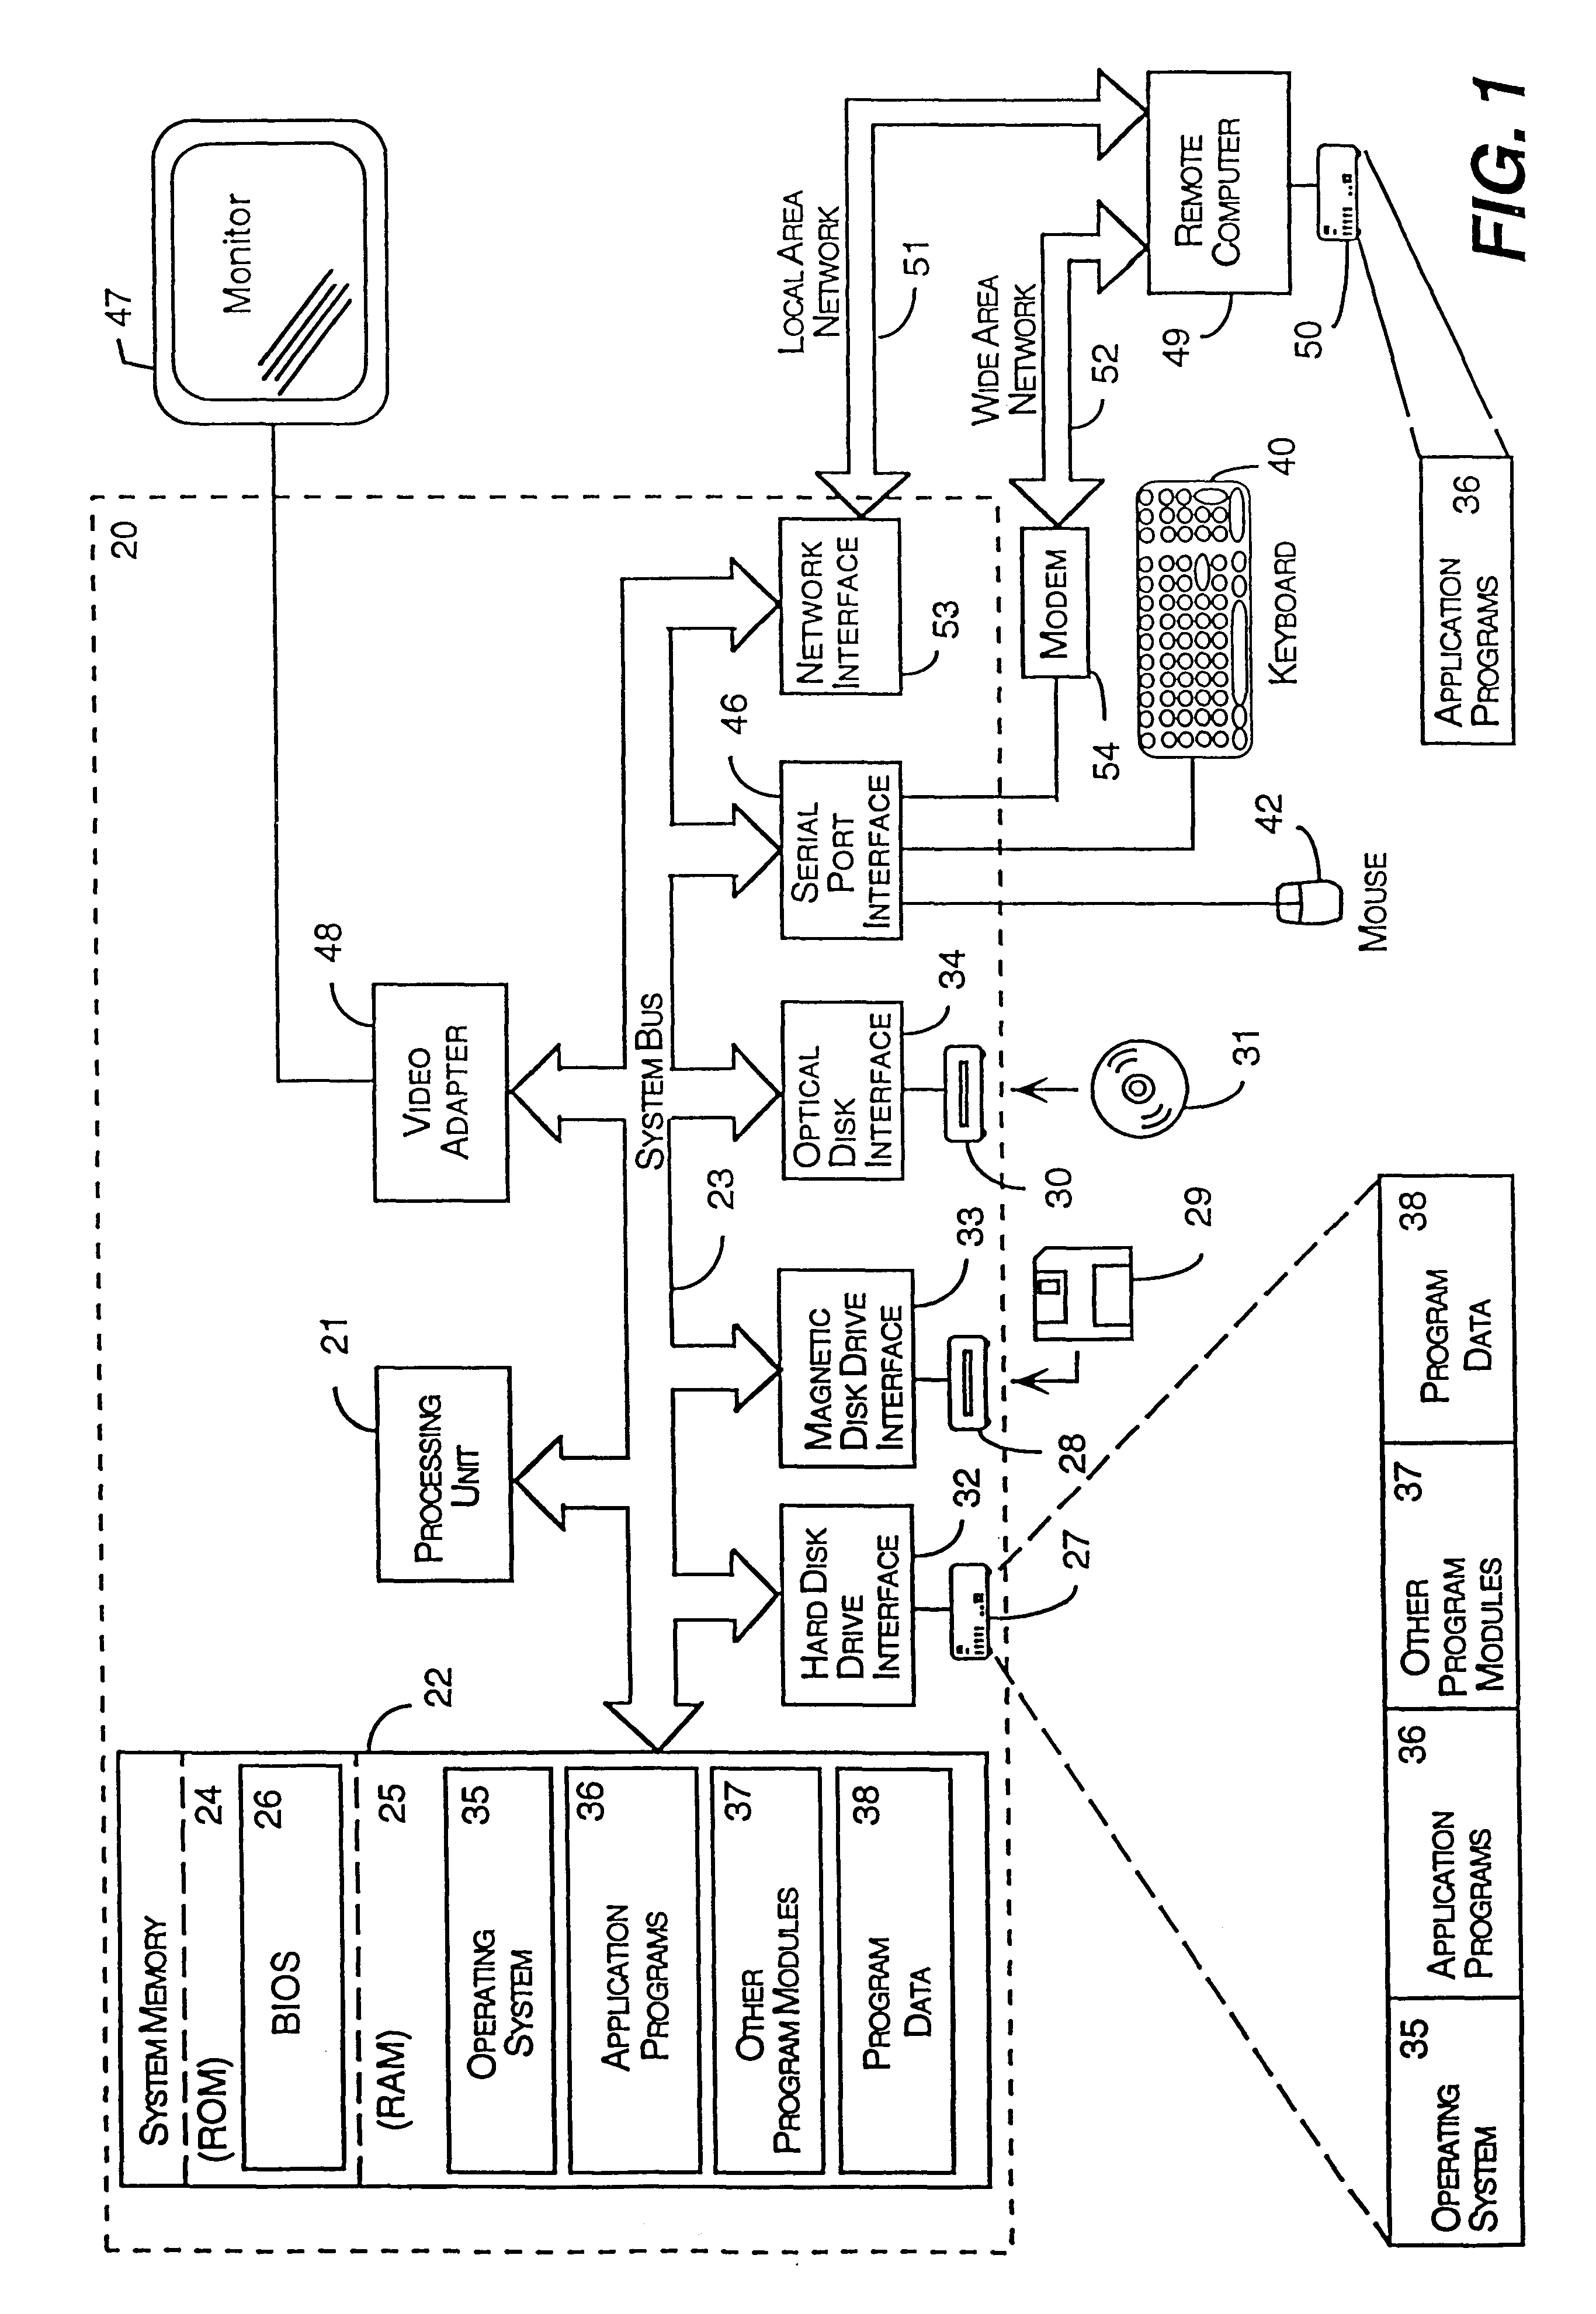 System and method for creating and inserting multiple data fragments into an electronic mail message